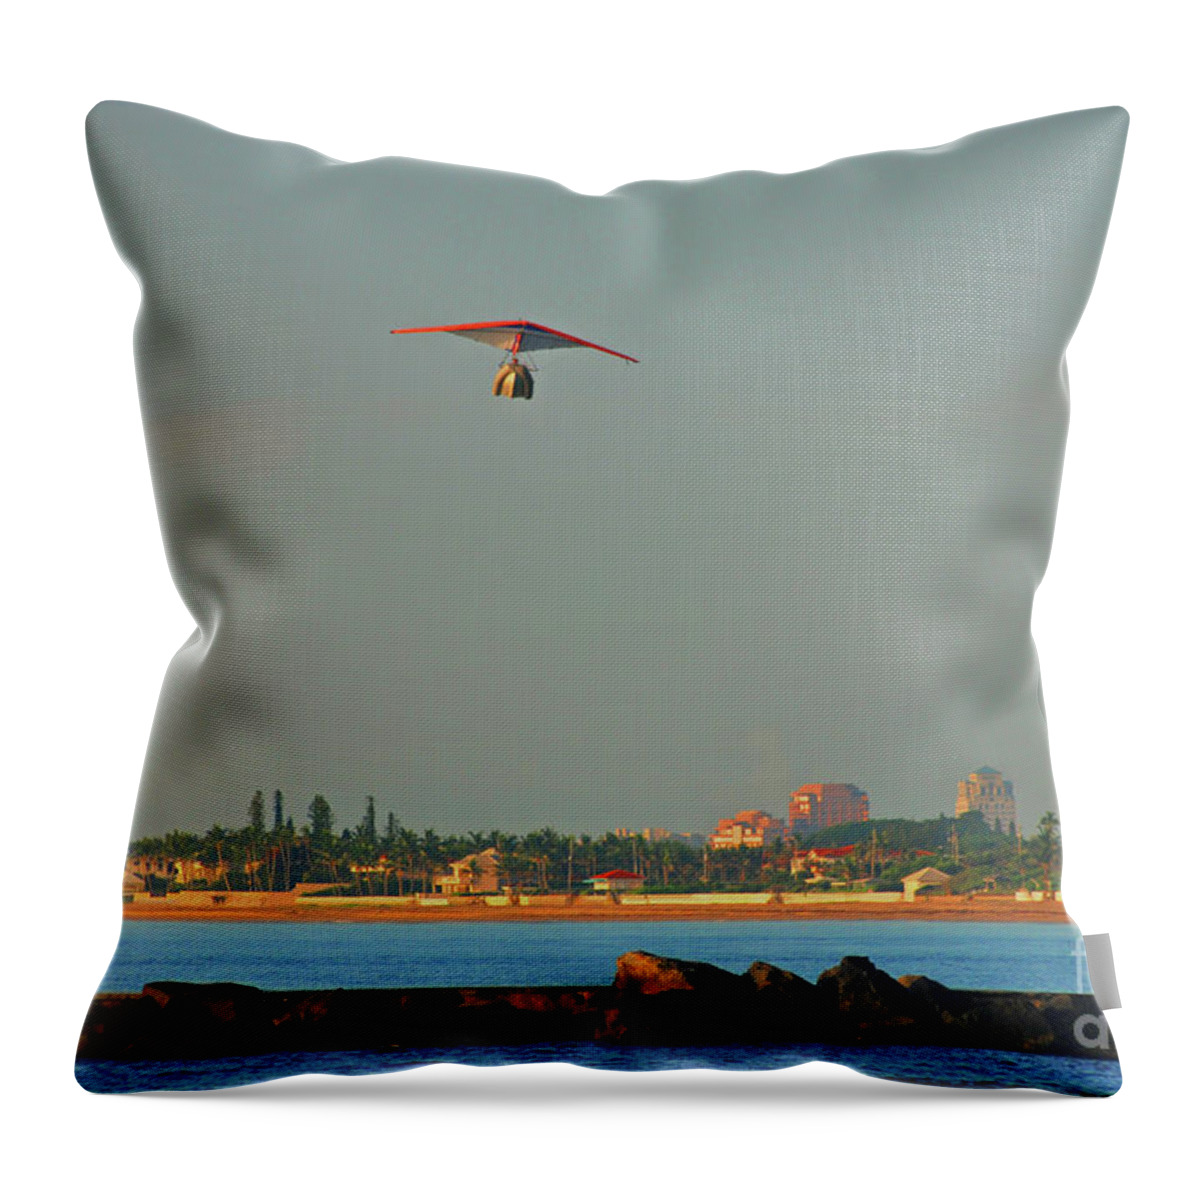 Flying Boat Throw Pillow featuring the photograph 38- Escape From Palm Beach by Joseph Keane